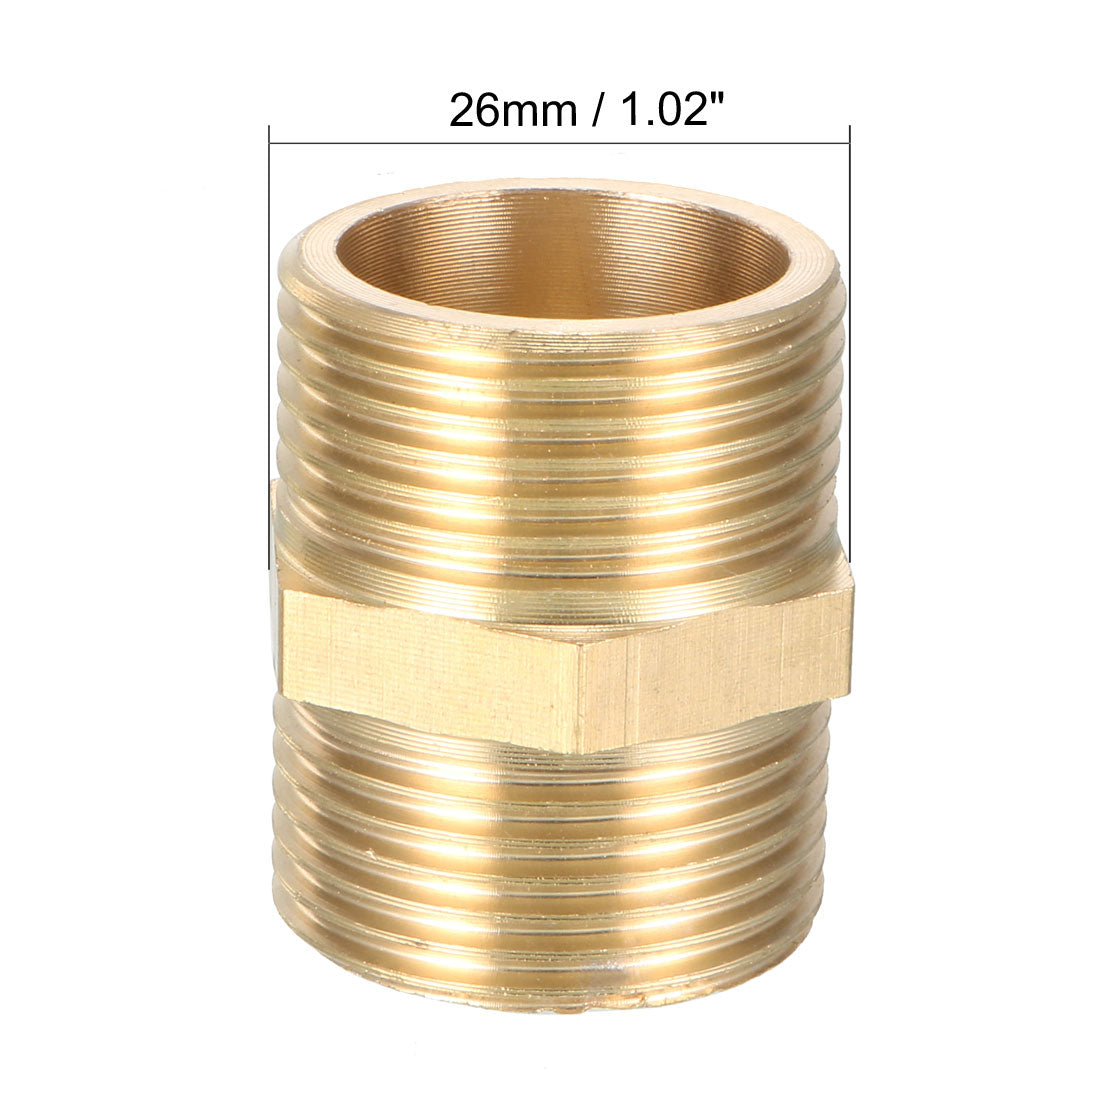 uxcell Uxcell Brass Pipe Fitting Hex Bushing 3/4 BSP Male x 3/4 BSP Male Thread Connectors